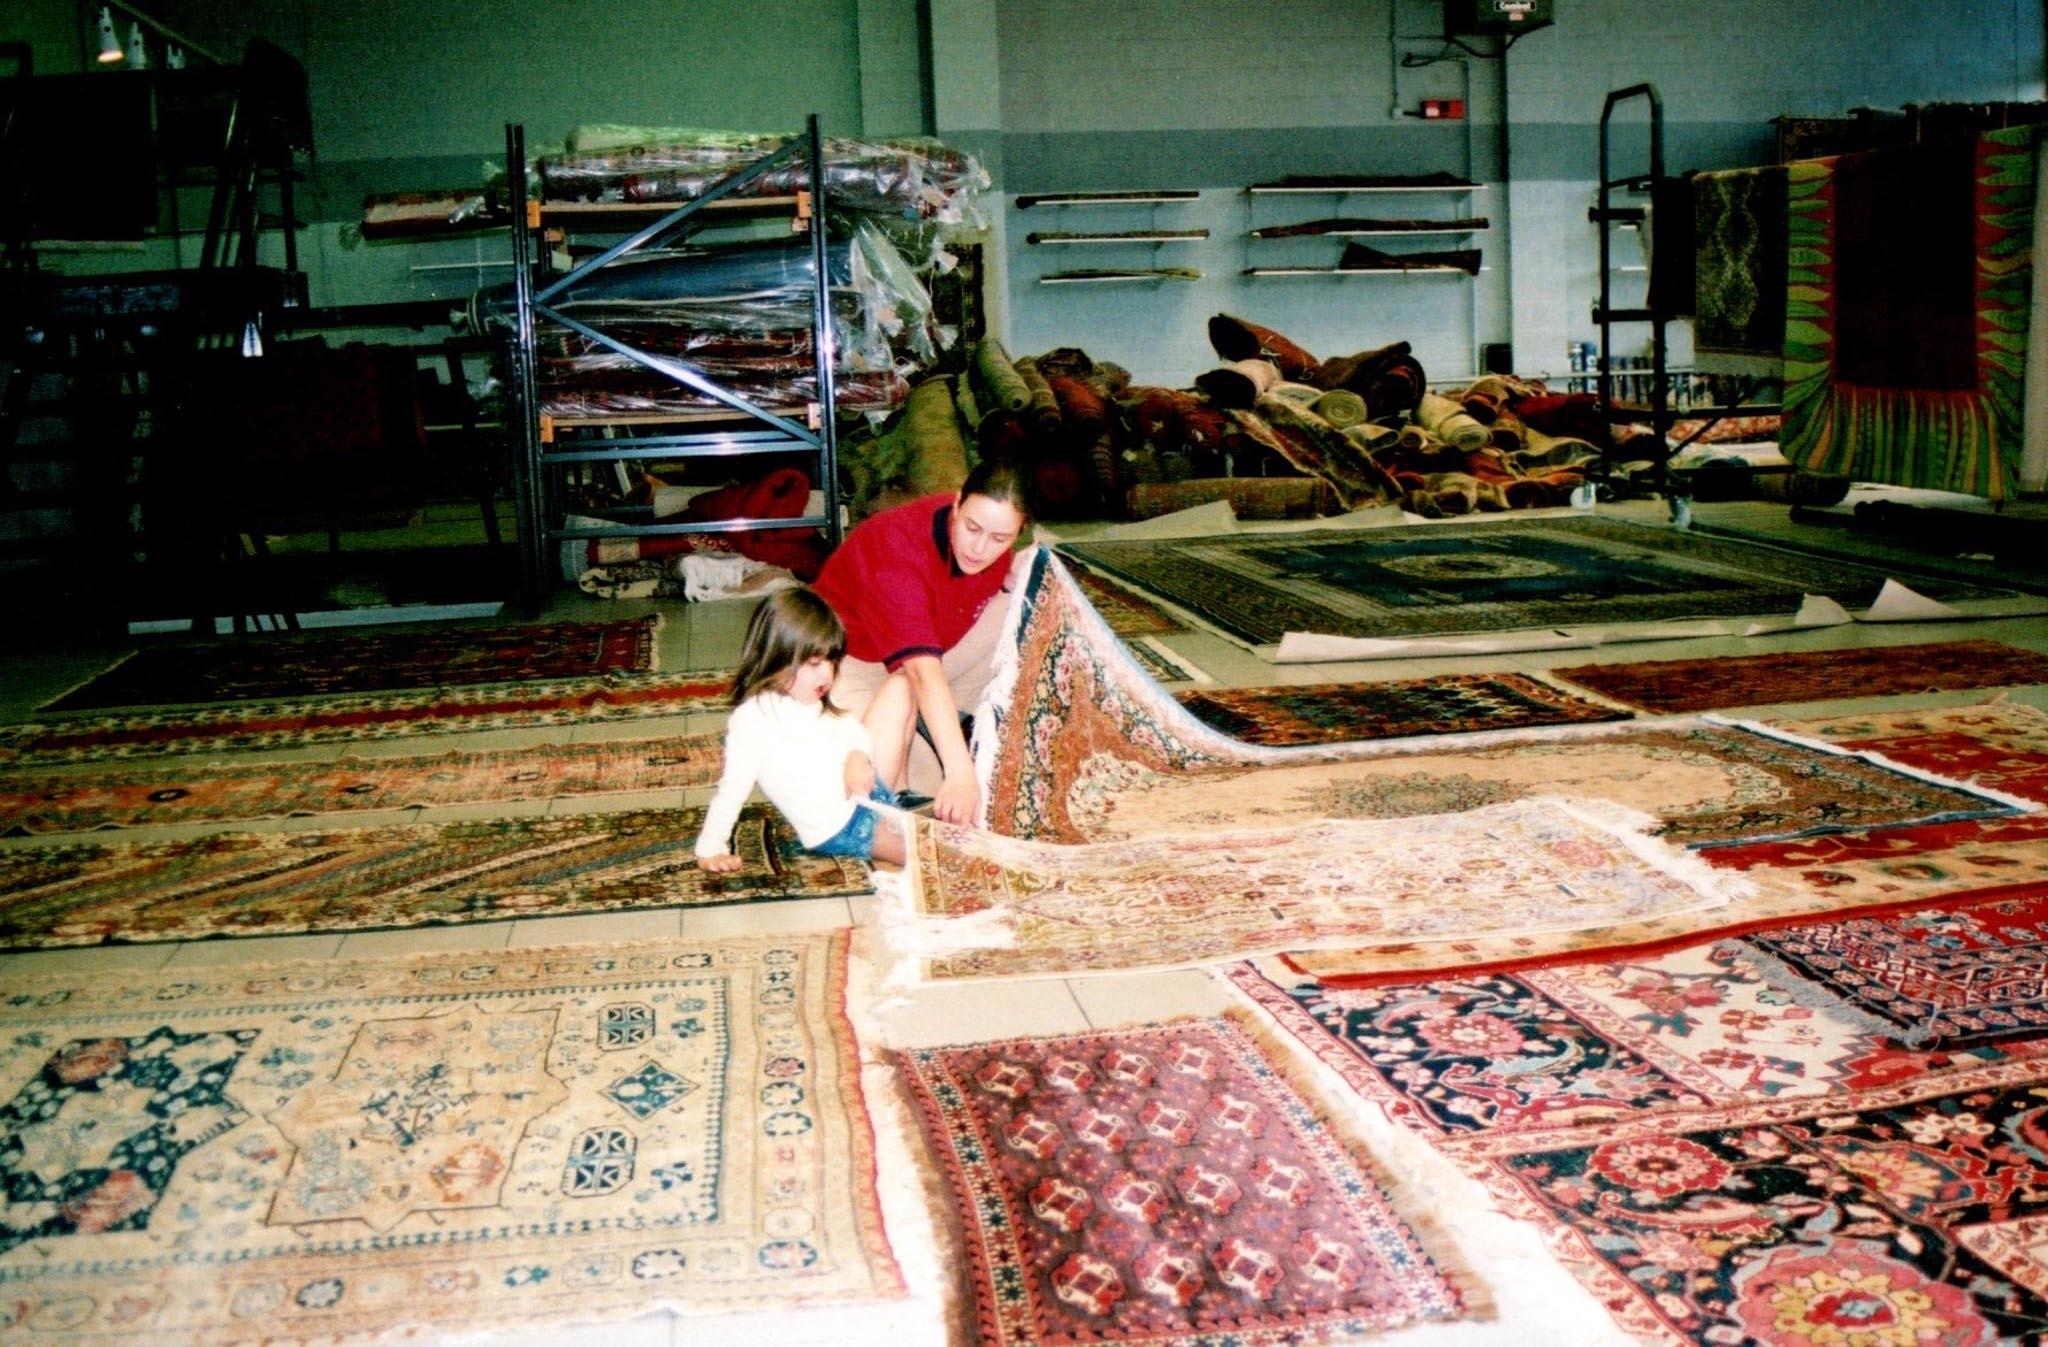 My mother and I in the barn with all the carpets